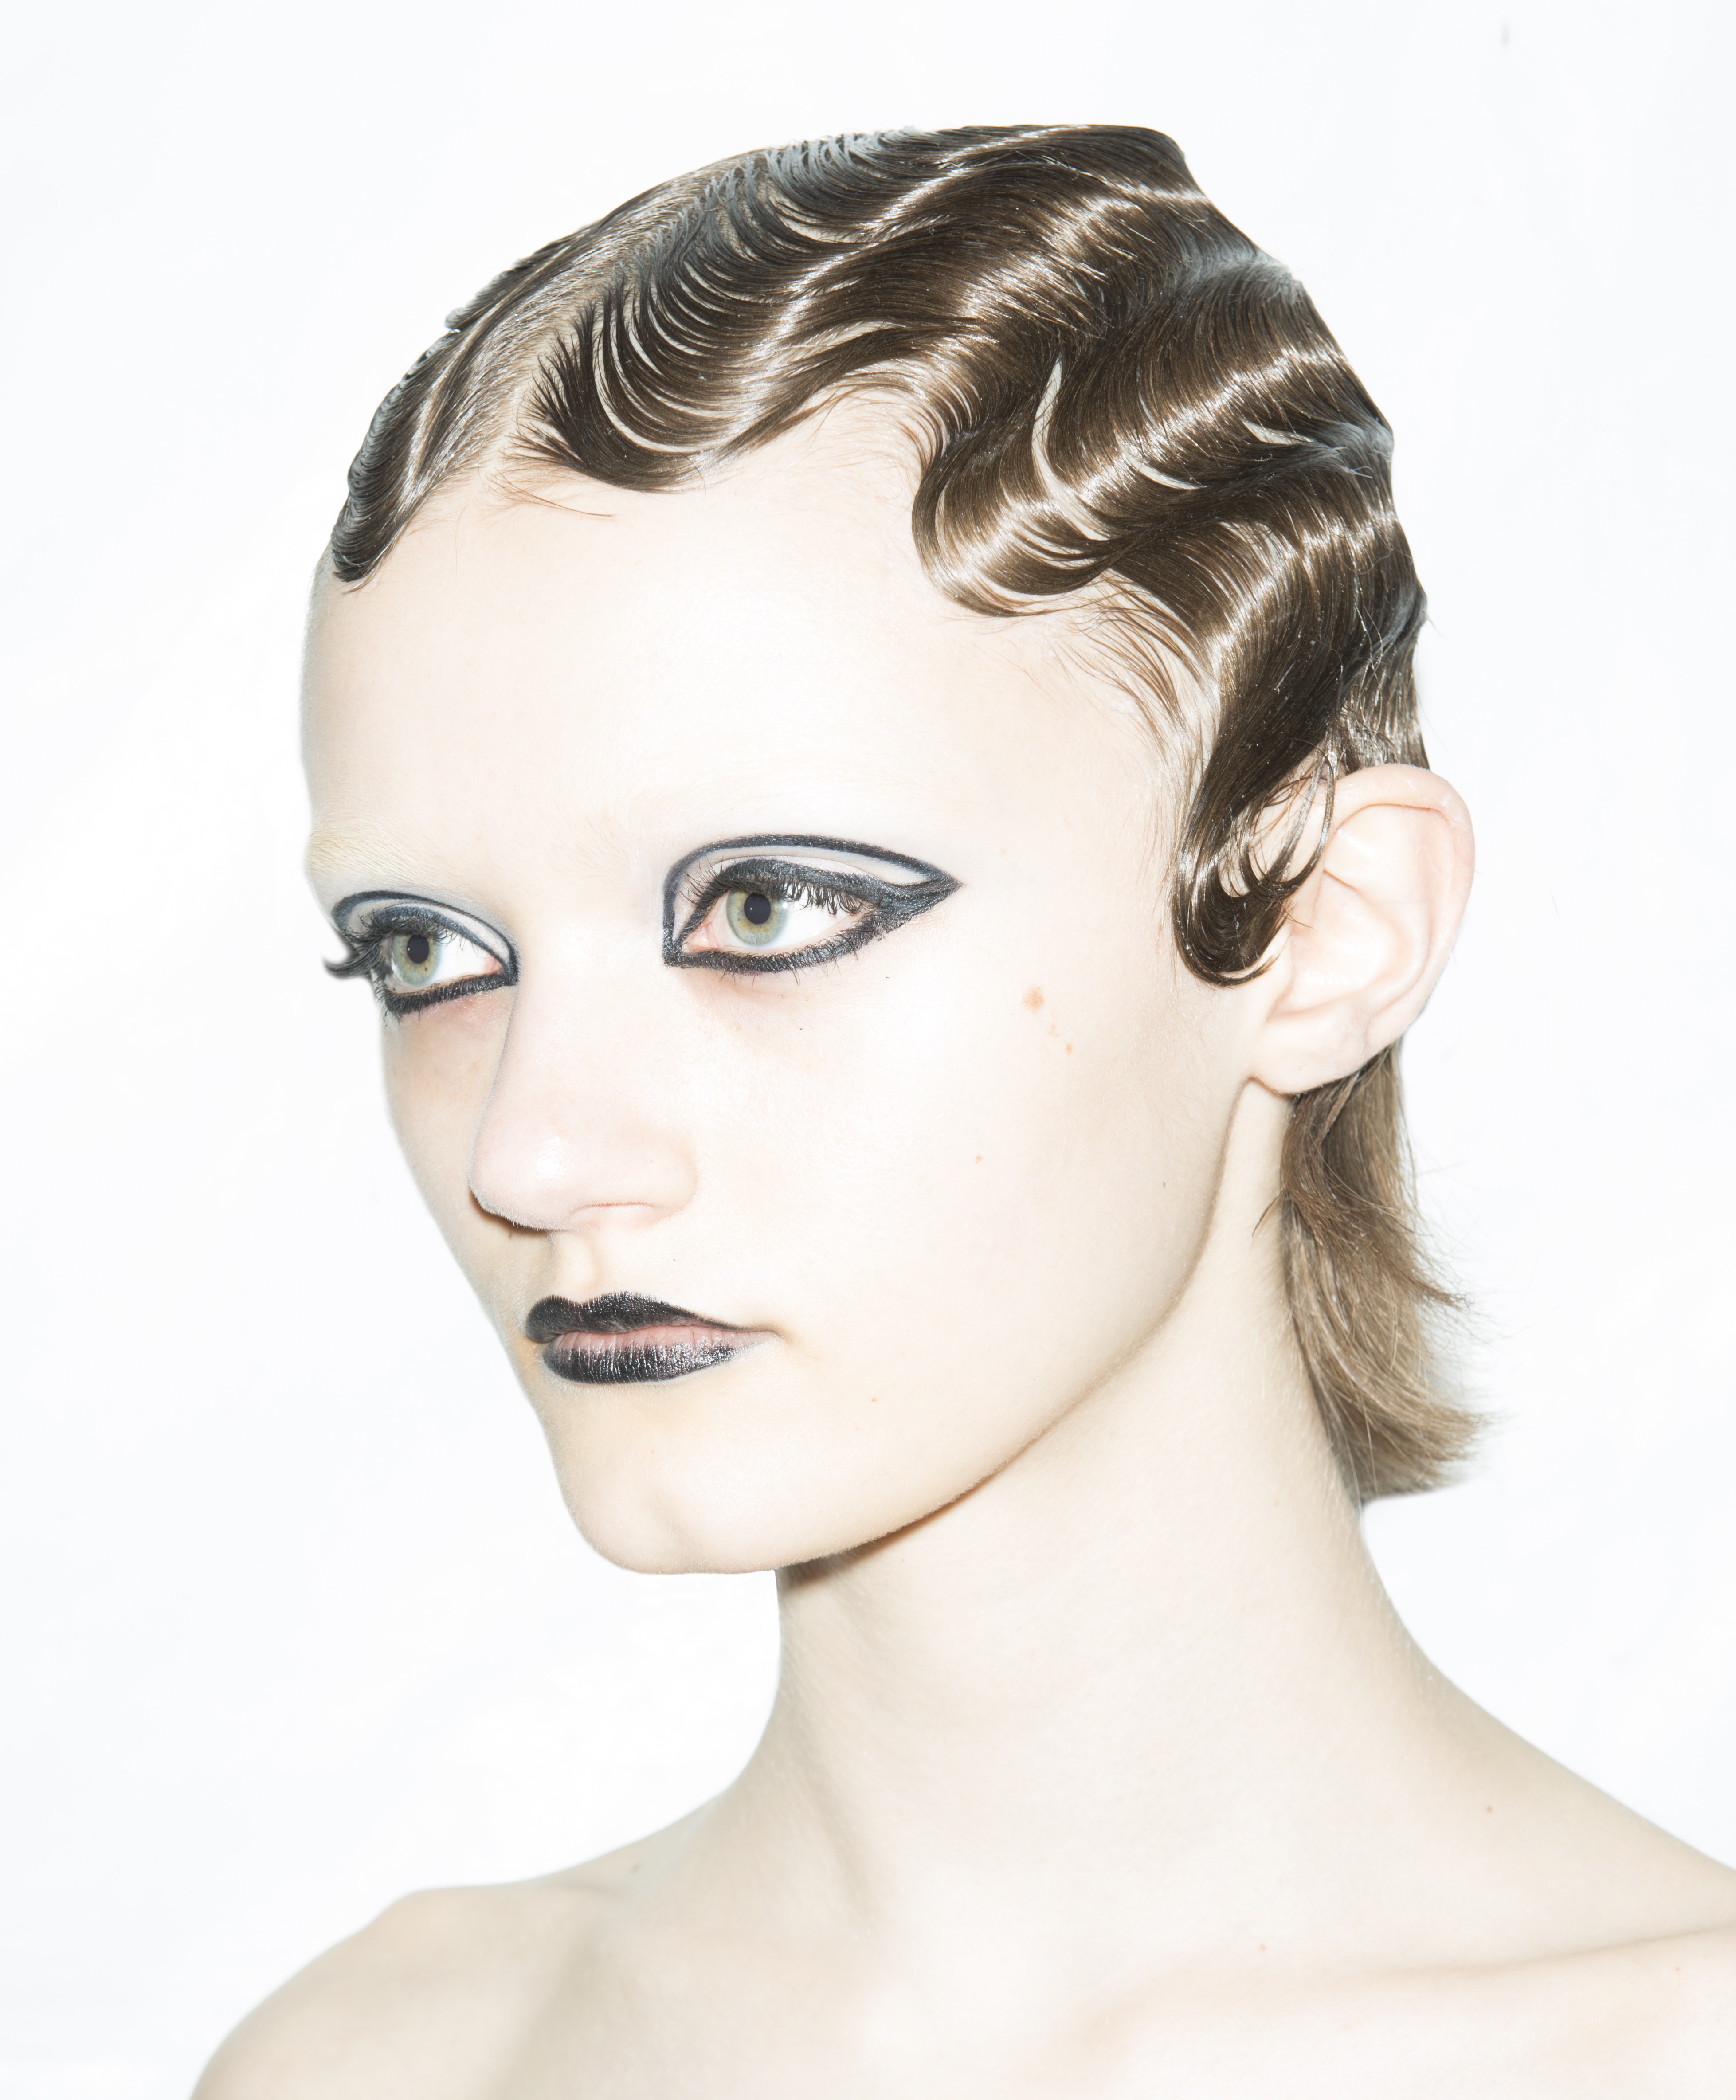 Modern Finger Waves: Get the NYFW Look - Ask the Pro Stylist